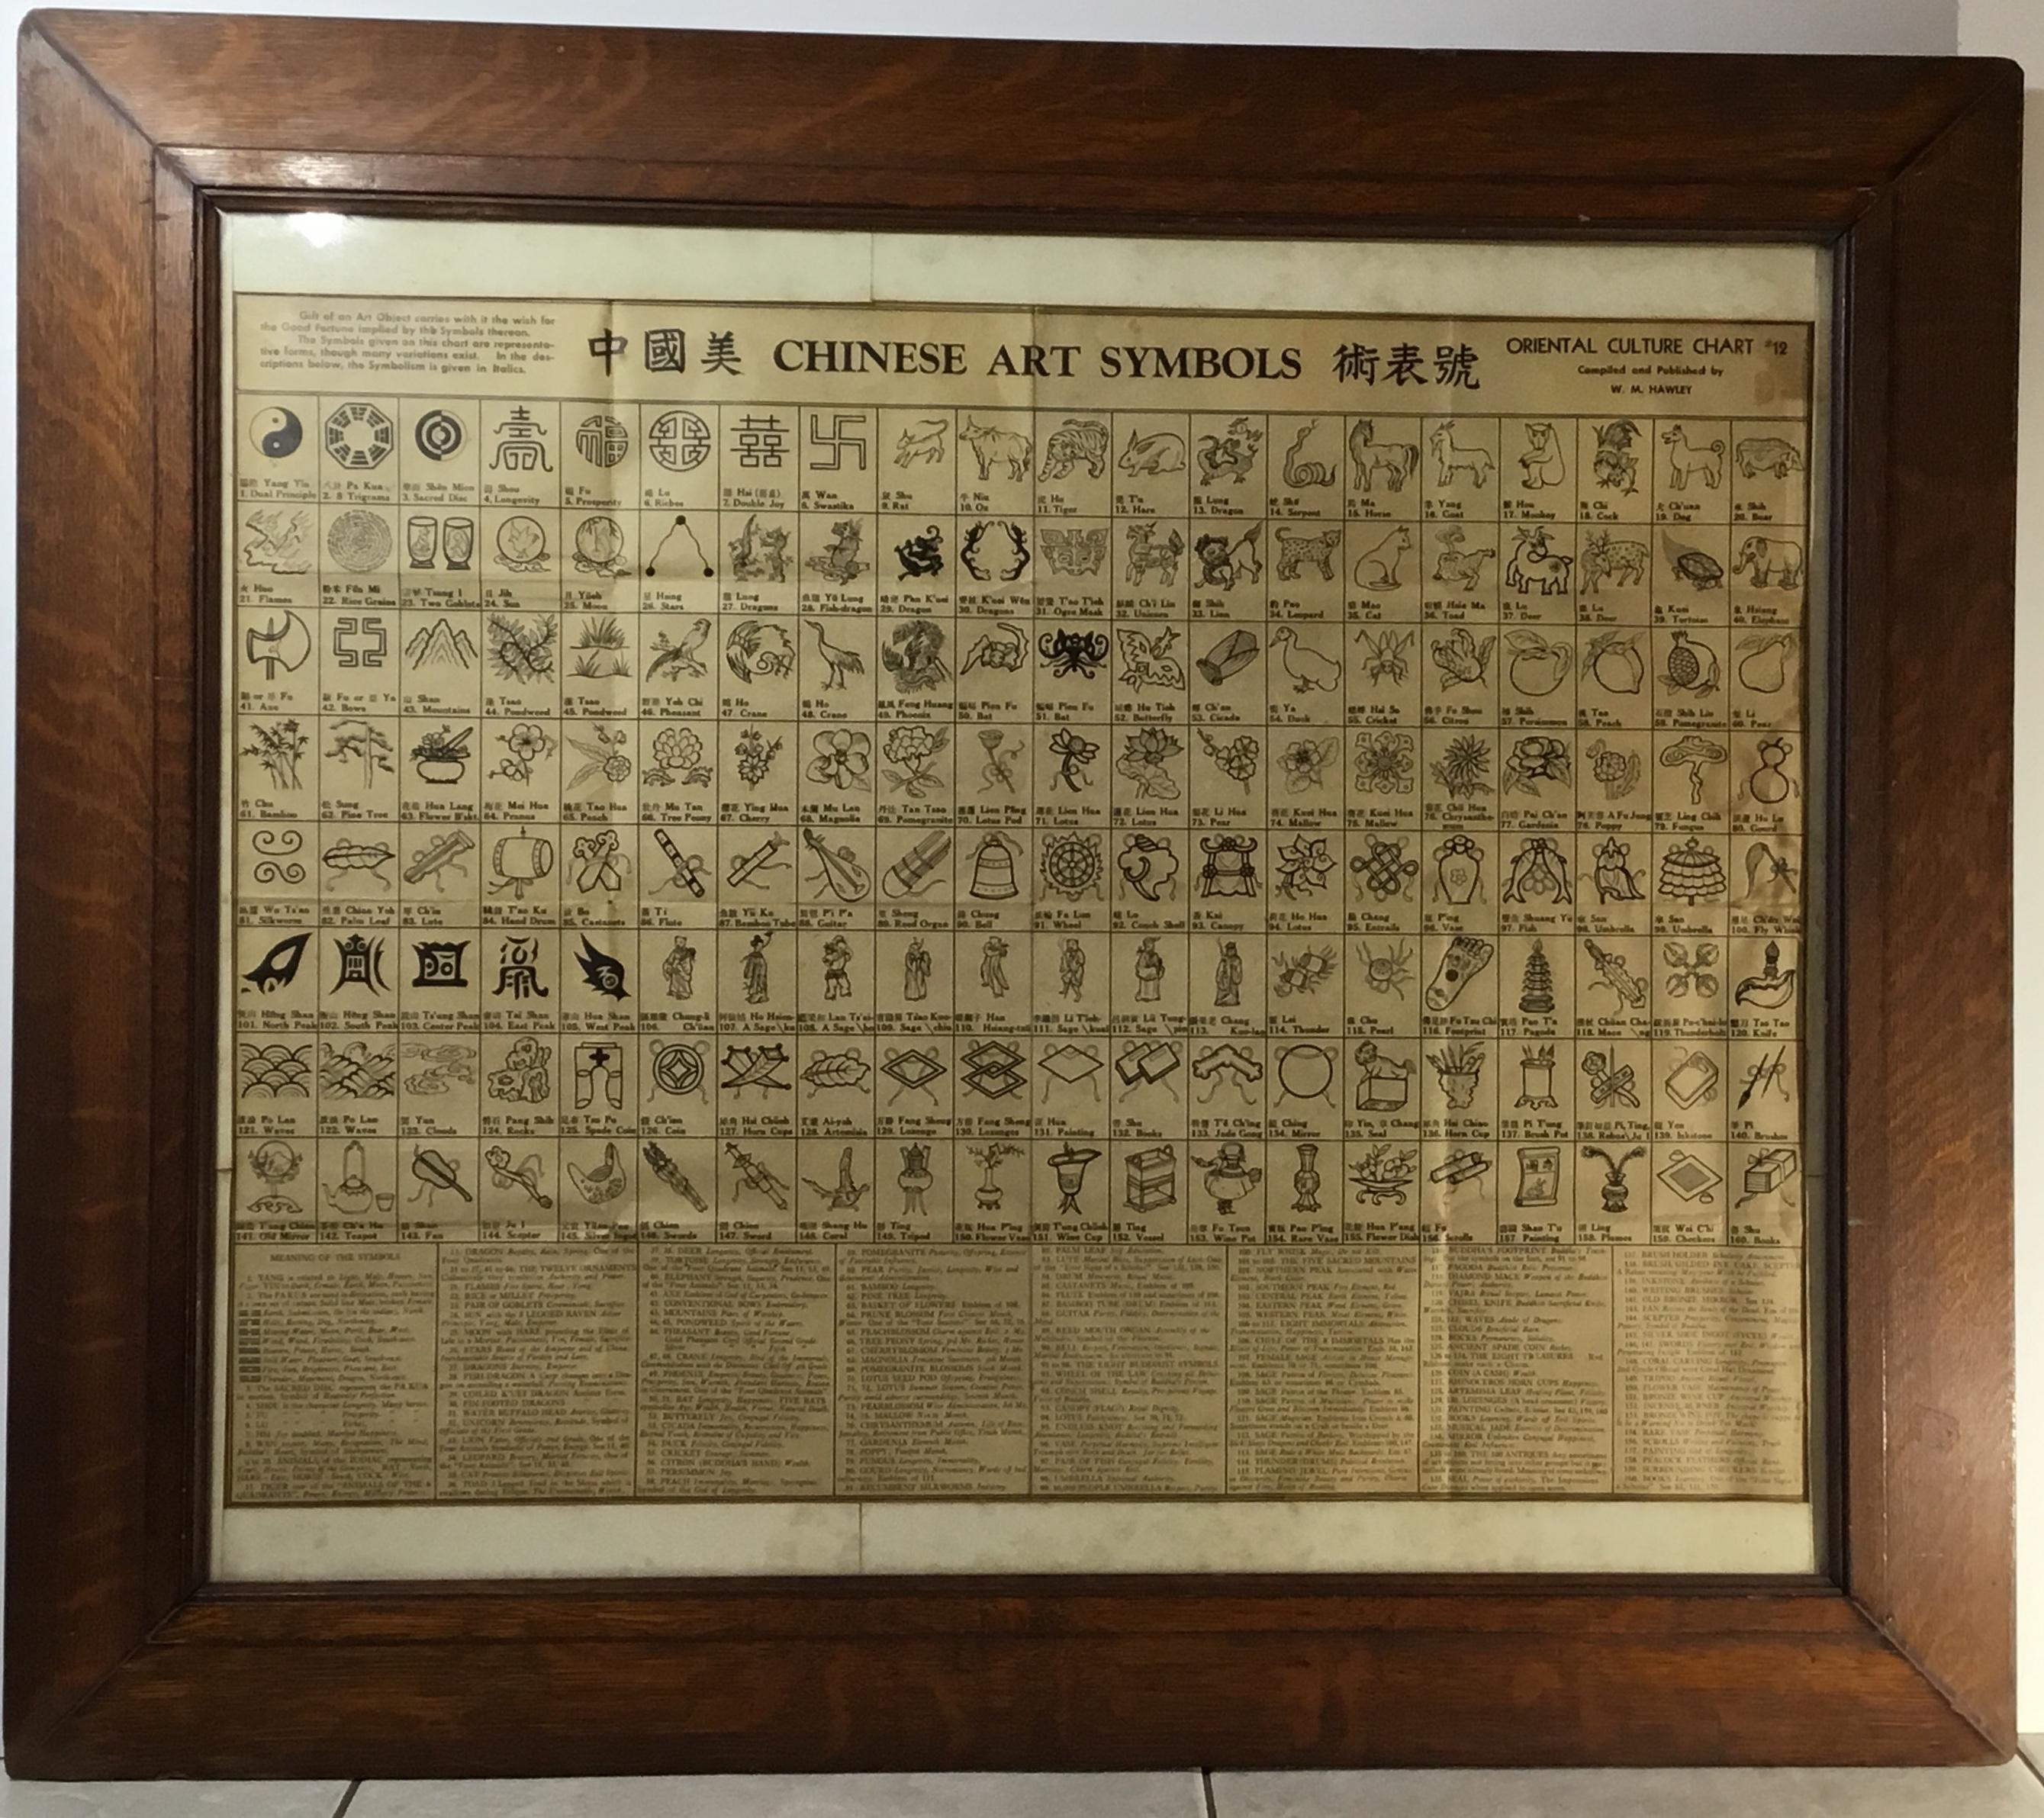 Exceptional wall hanging made of tigerwood frame with unique Chinese art symbols chart of 160
Symbols though many variations, and there descriptions and symbolism. This chart was published by very famous publisher W.M. Hayley (born 1896-1987).